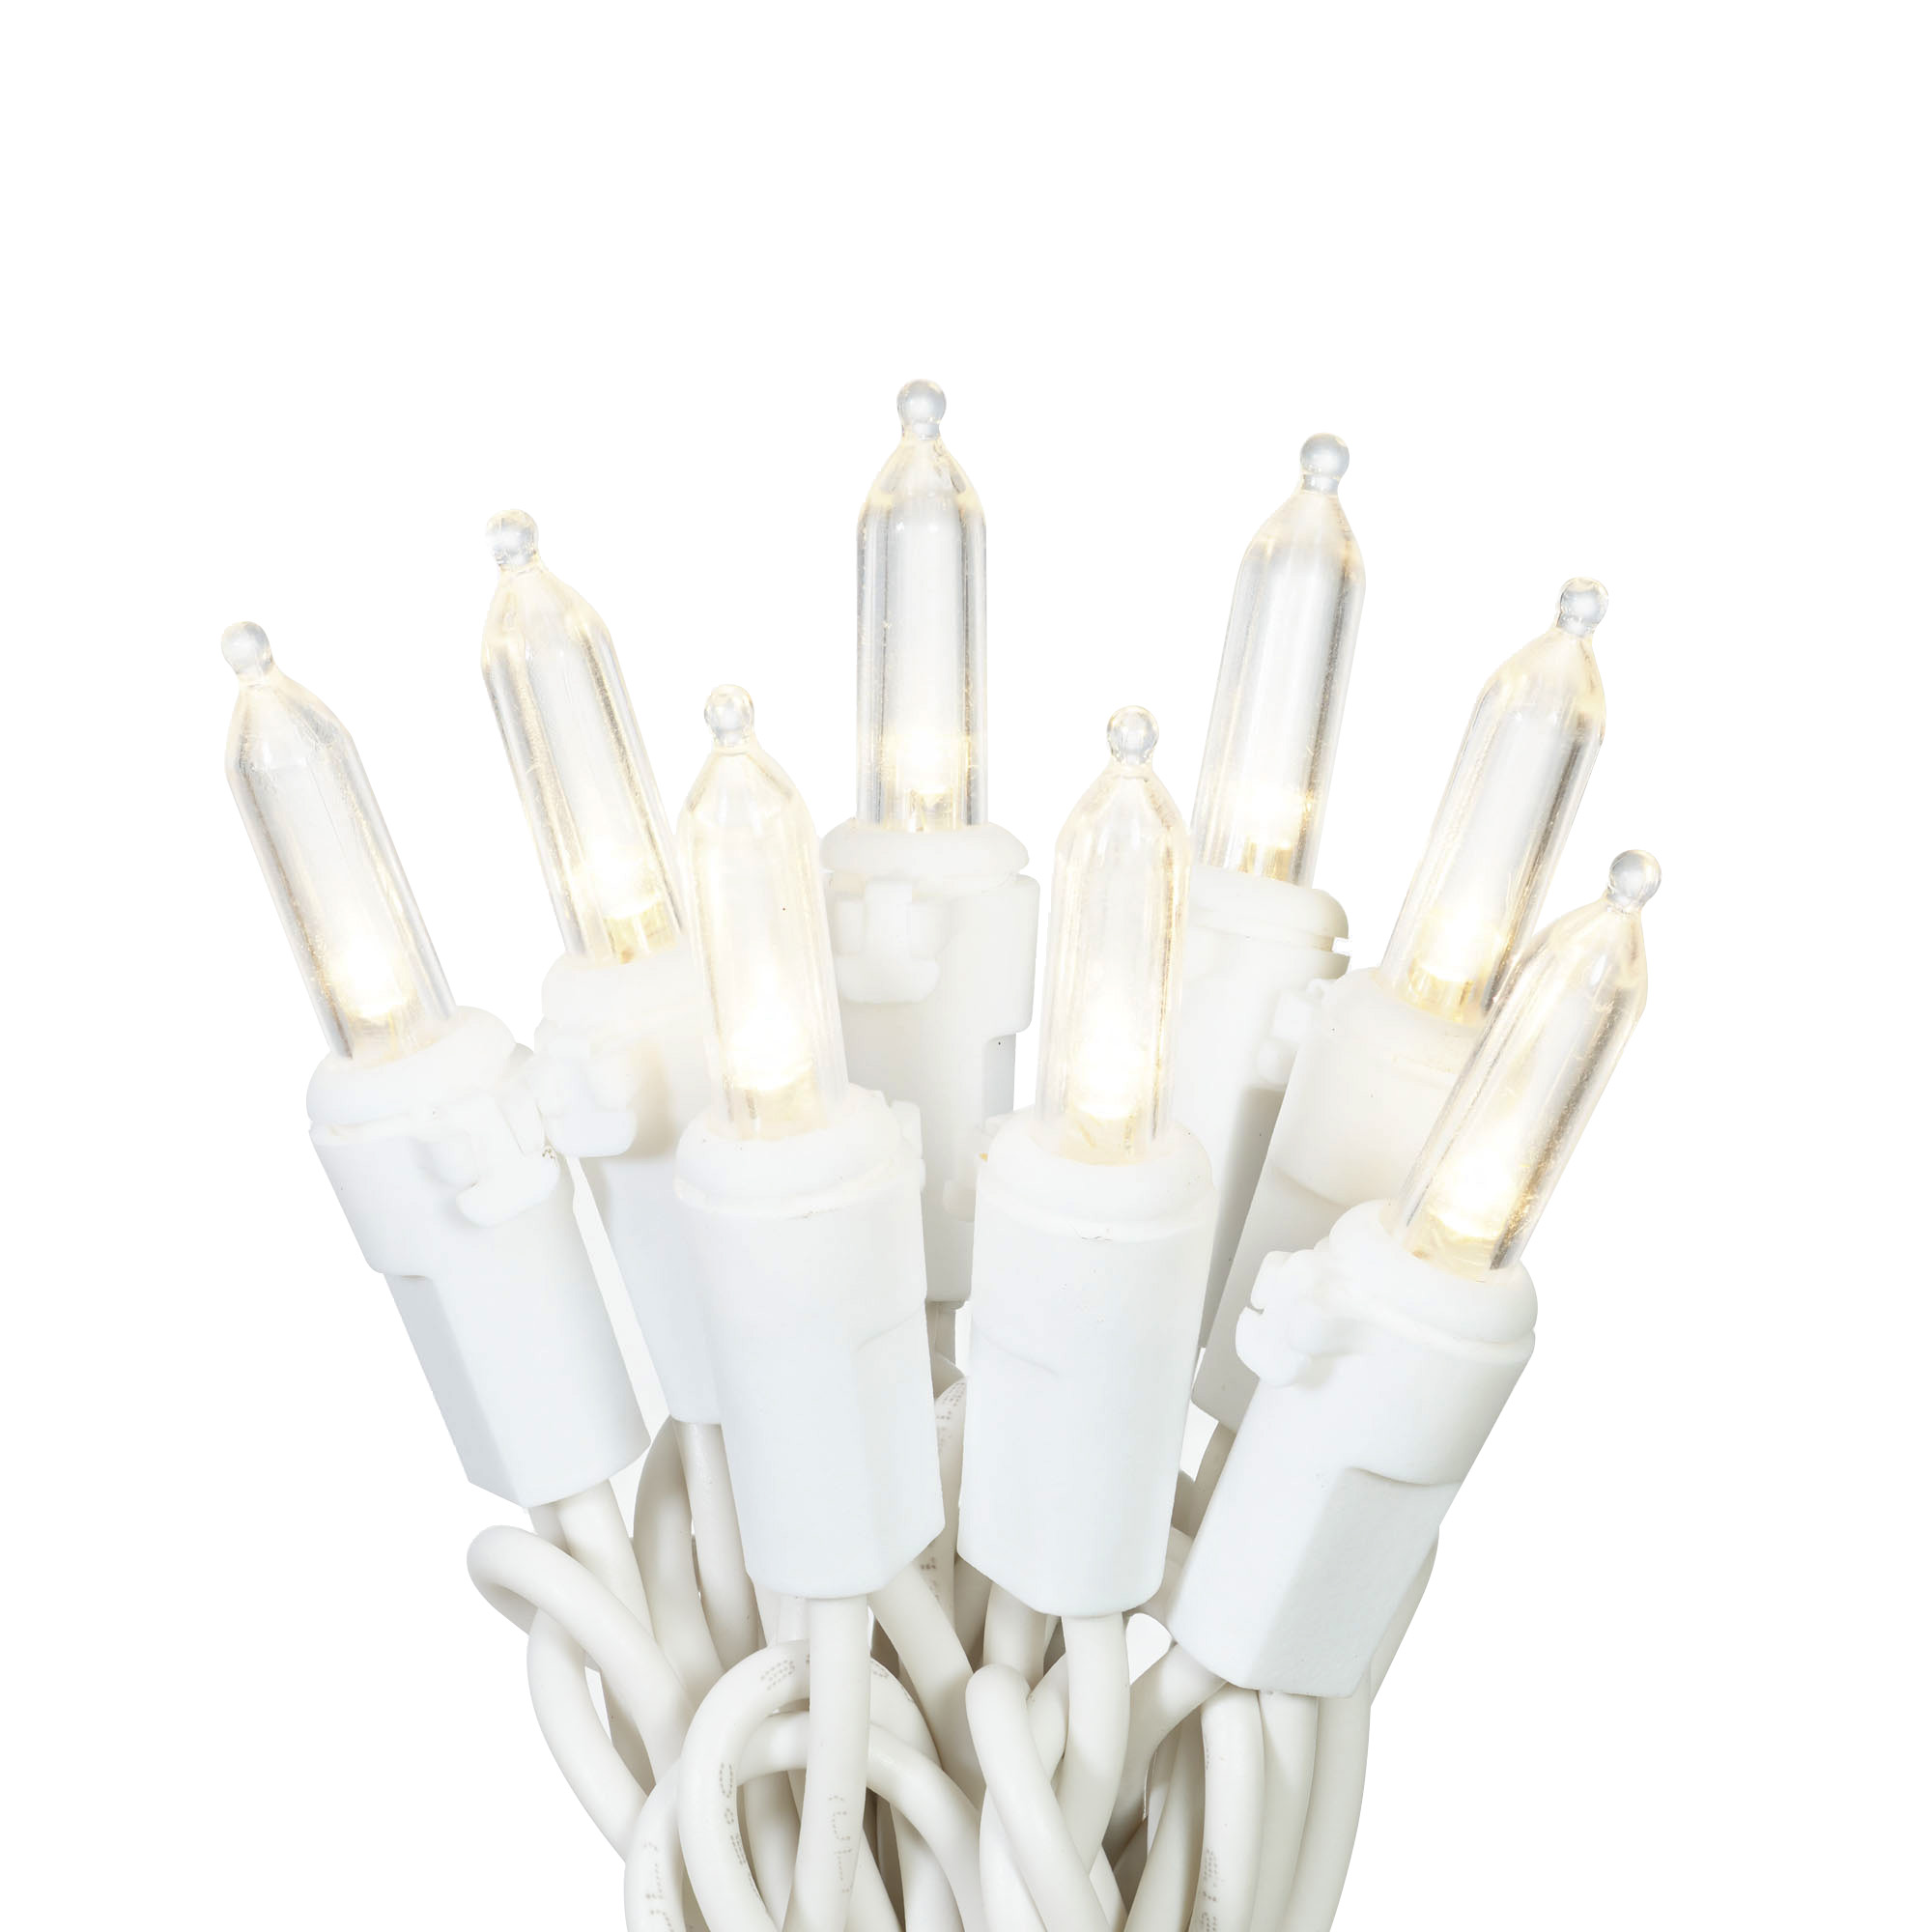 Mainstays 100-Count Warm White LED Mini Outdoor String Lights with White Wire - image 1 of 9